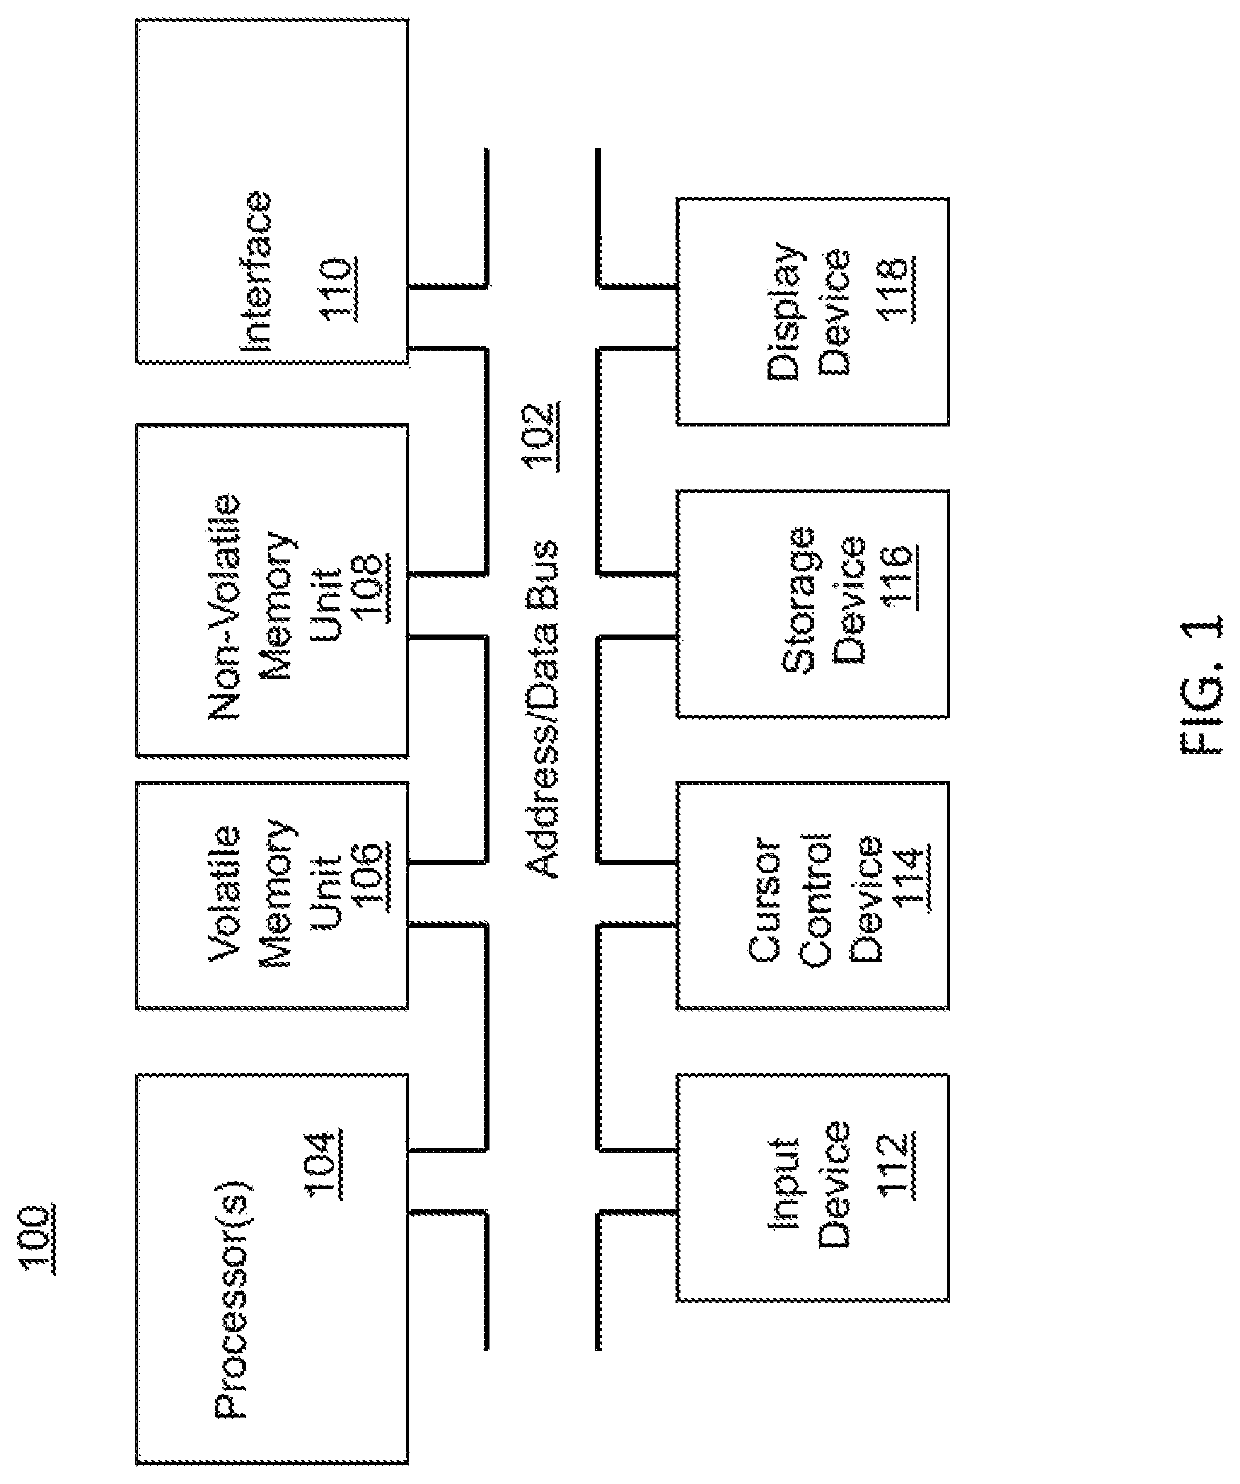 System and method for neuromorphic visual activity classification based on foveated detection and contextual filtering